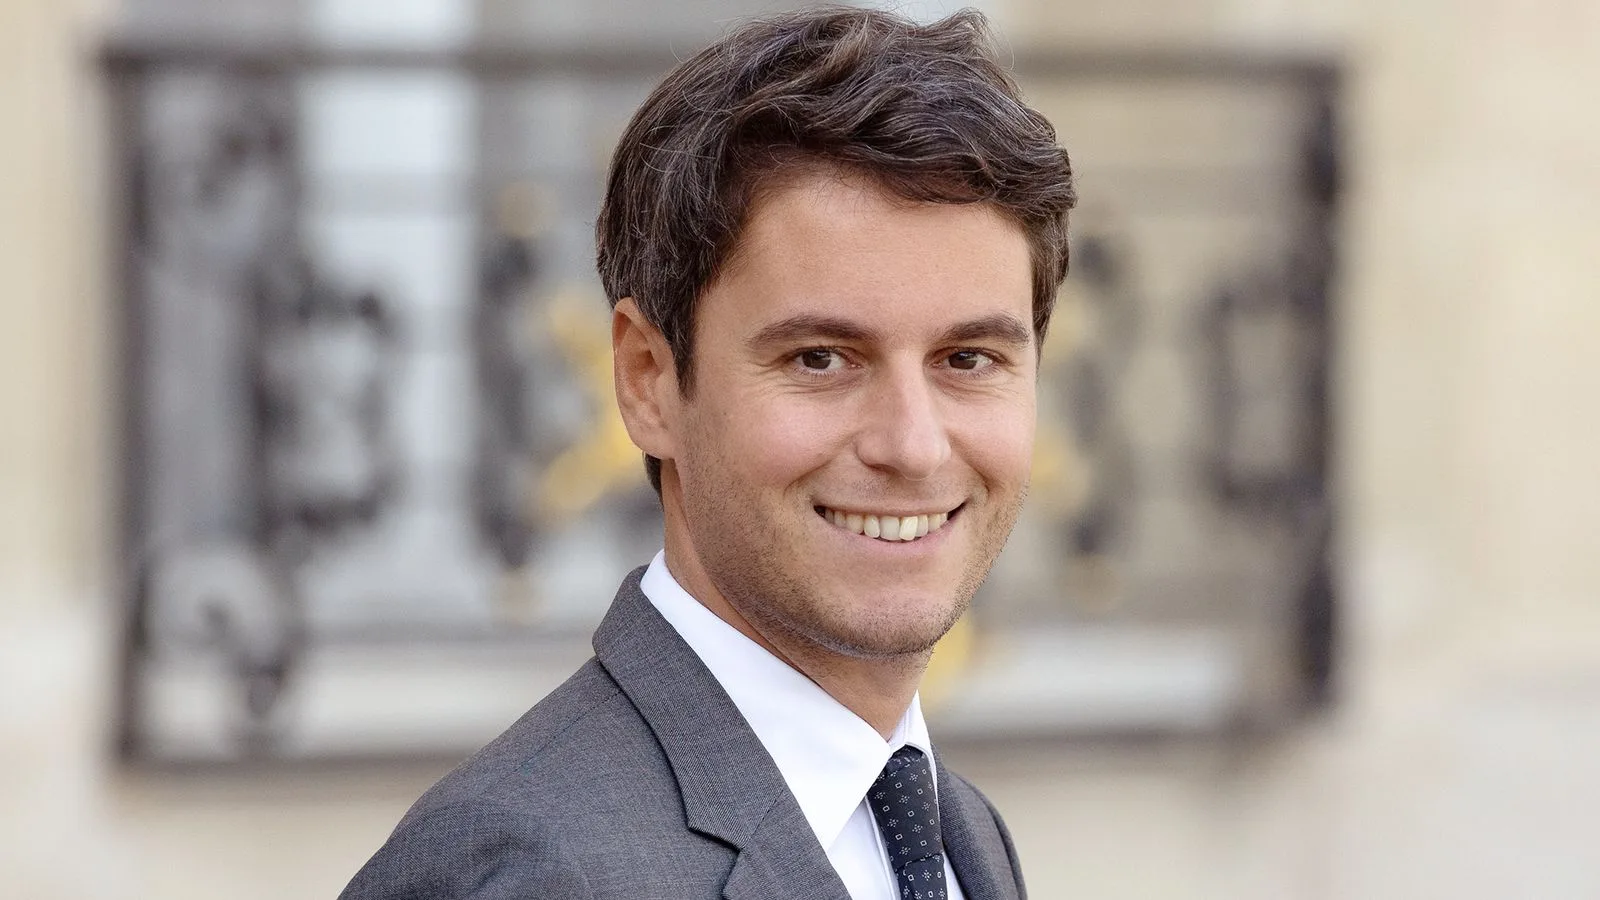 Gabriel Attal became the youngest Prime Minister of France